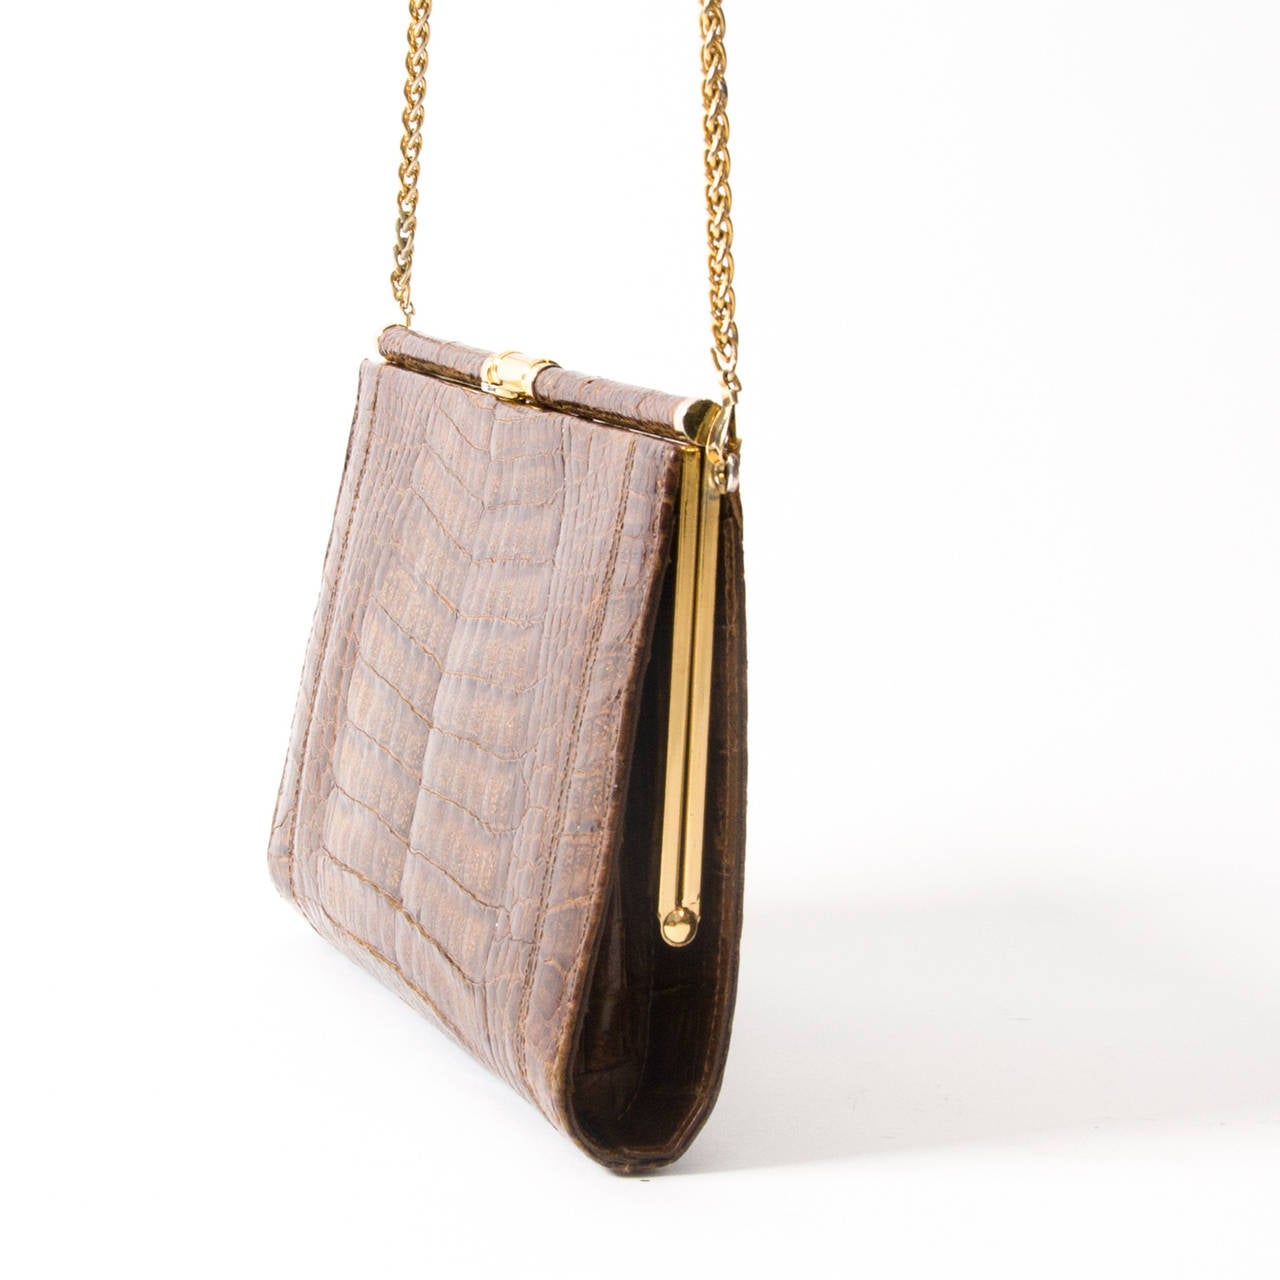 Beautiful vintage Bellestone Alligator Purse , the perfect bag for day and night. 
Wear it is a clutch, casual appearance by slinging the bag over your shoulder or wearing it as a crossbody purse.